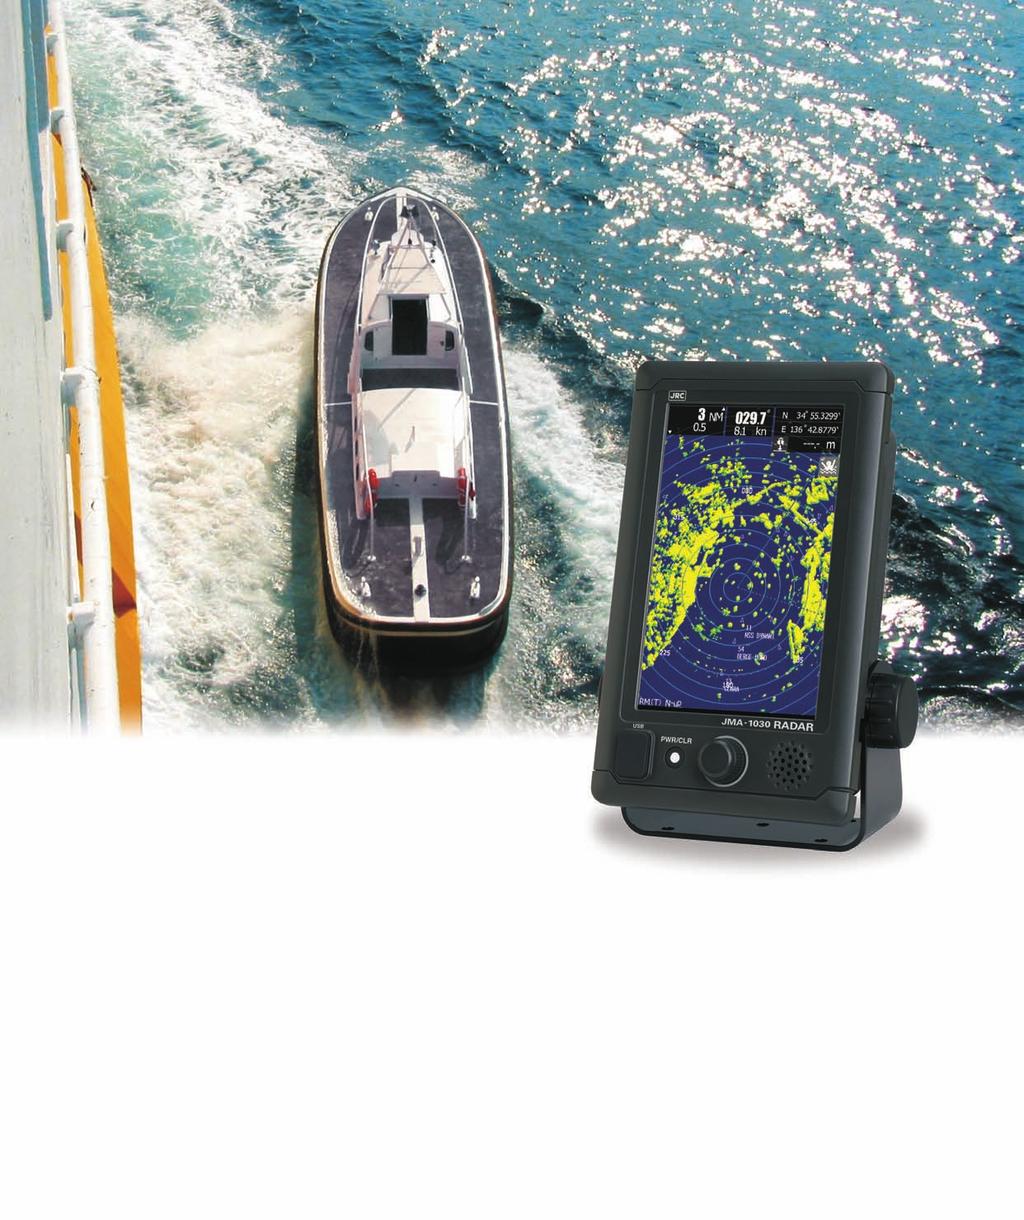 JMA-1030 Radar the JMA-1030 is an easy to use radar that greatly supports your ship's handling by touch operation 7-inch wide VGA color touch